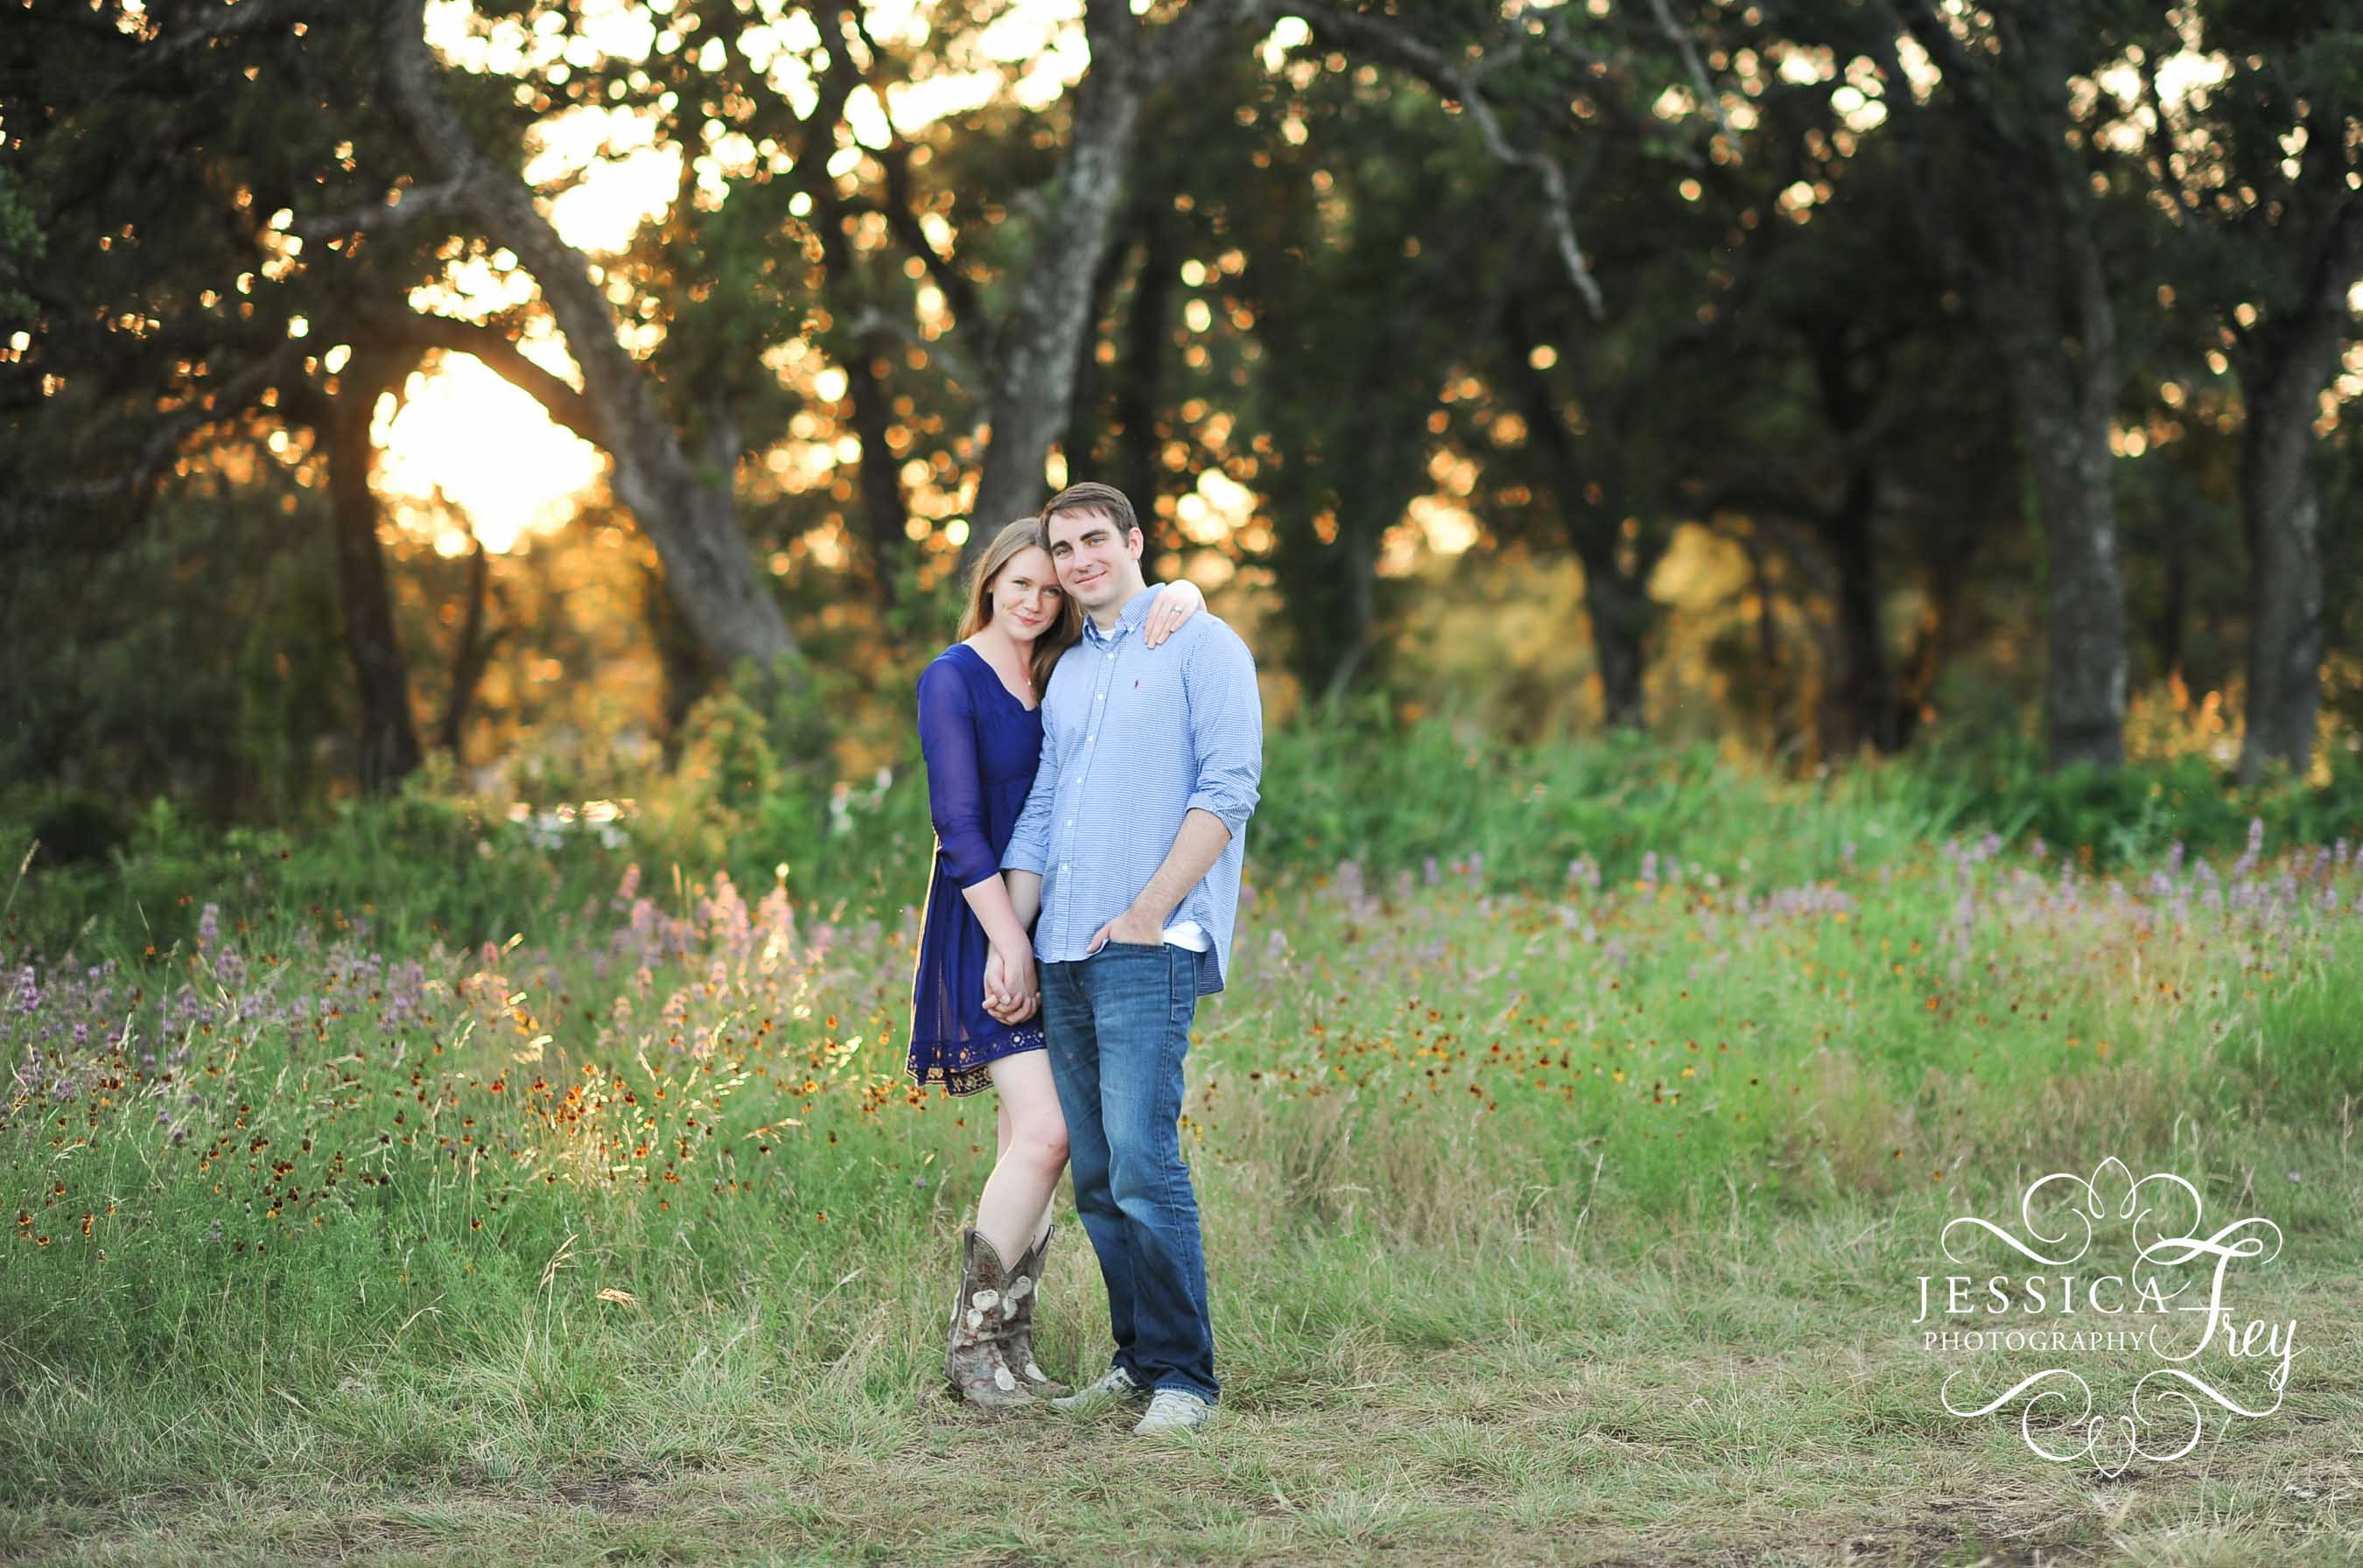 hill country engagement photos, engagement photos in austin, jester king brewery, jester king brewery photo shoot, austin engagement photos, austin wedding photographer, hill country wedding photographer, wedding photographer in austin, Brian & Jill engagement photos, jessica frey photography